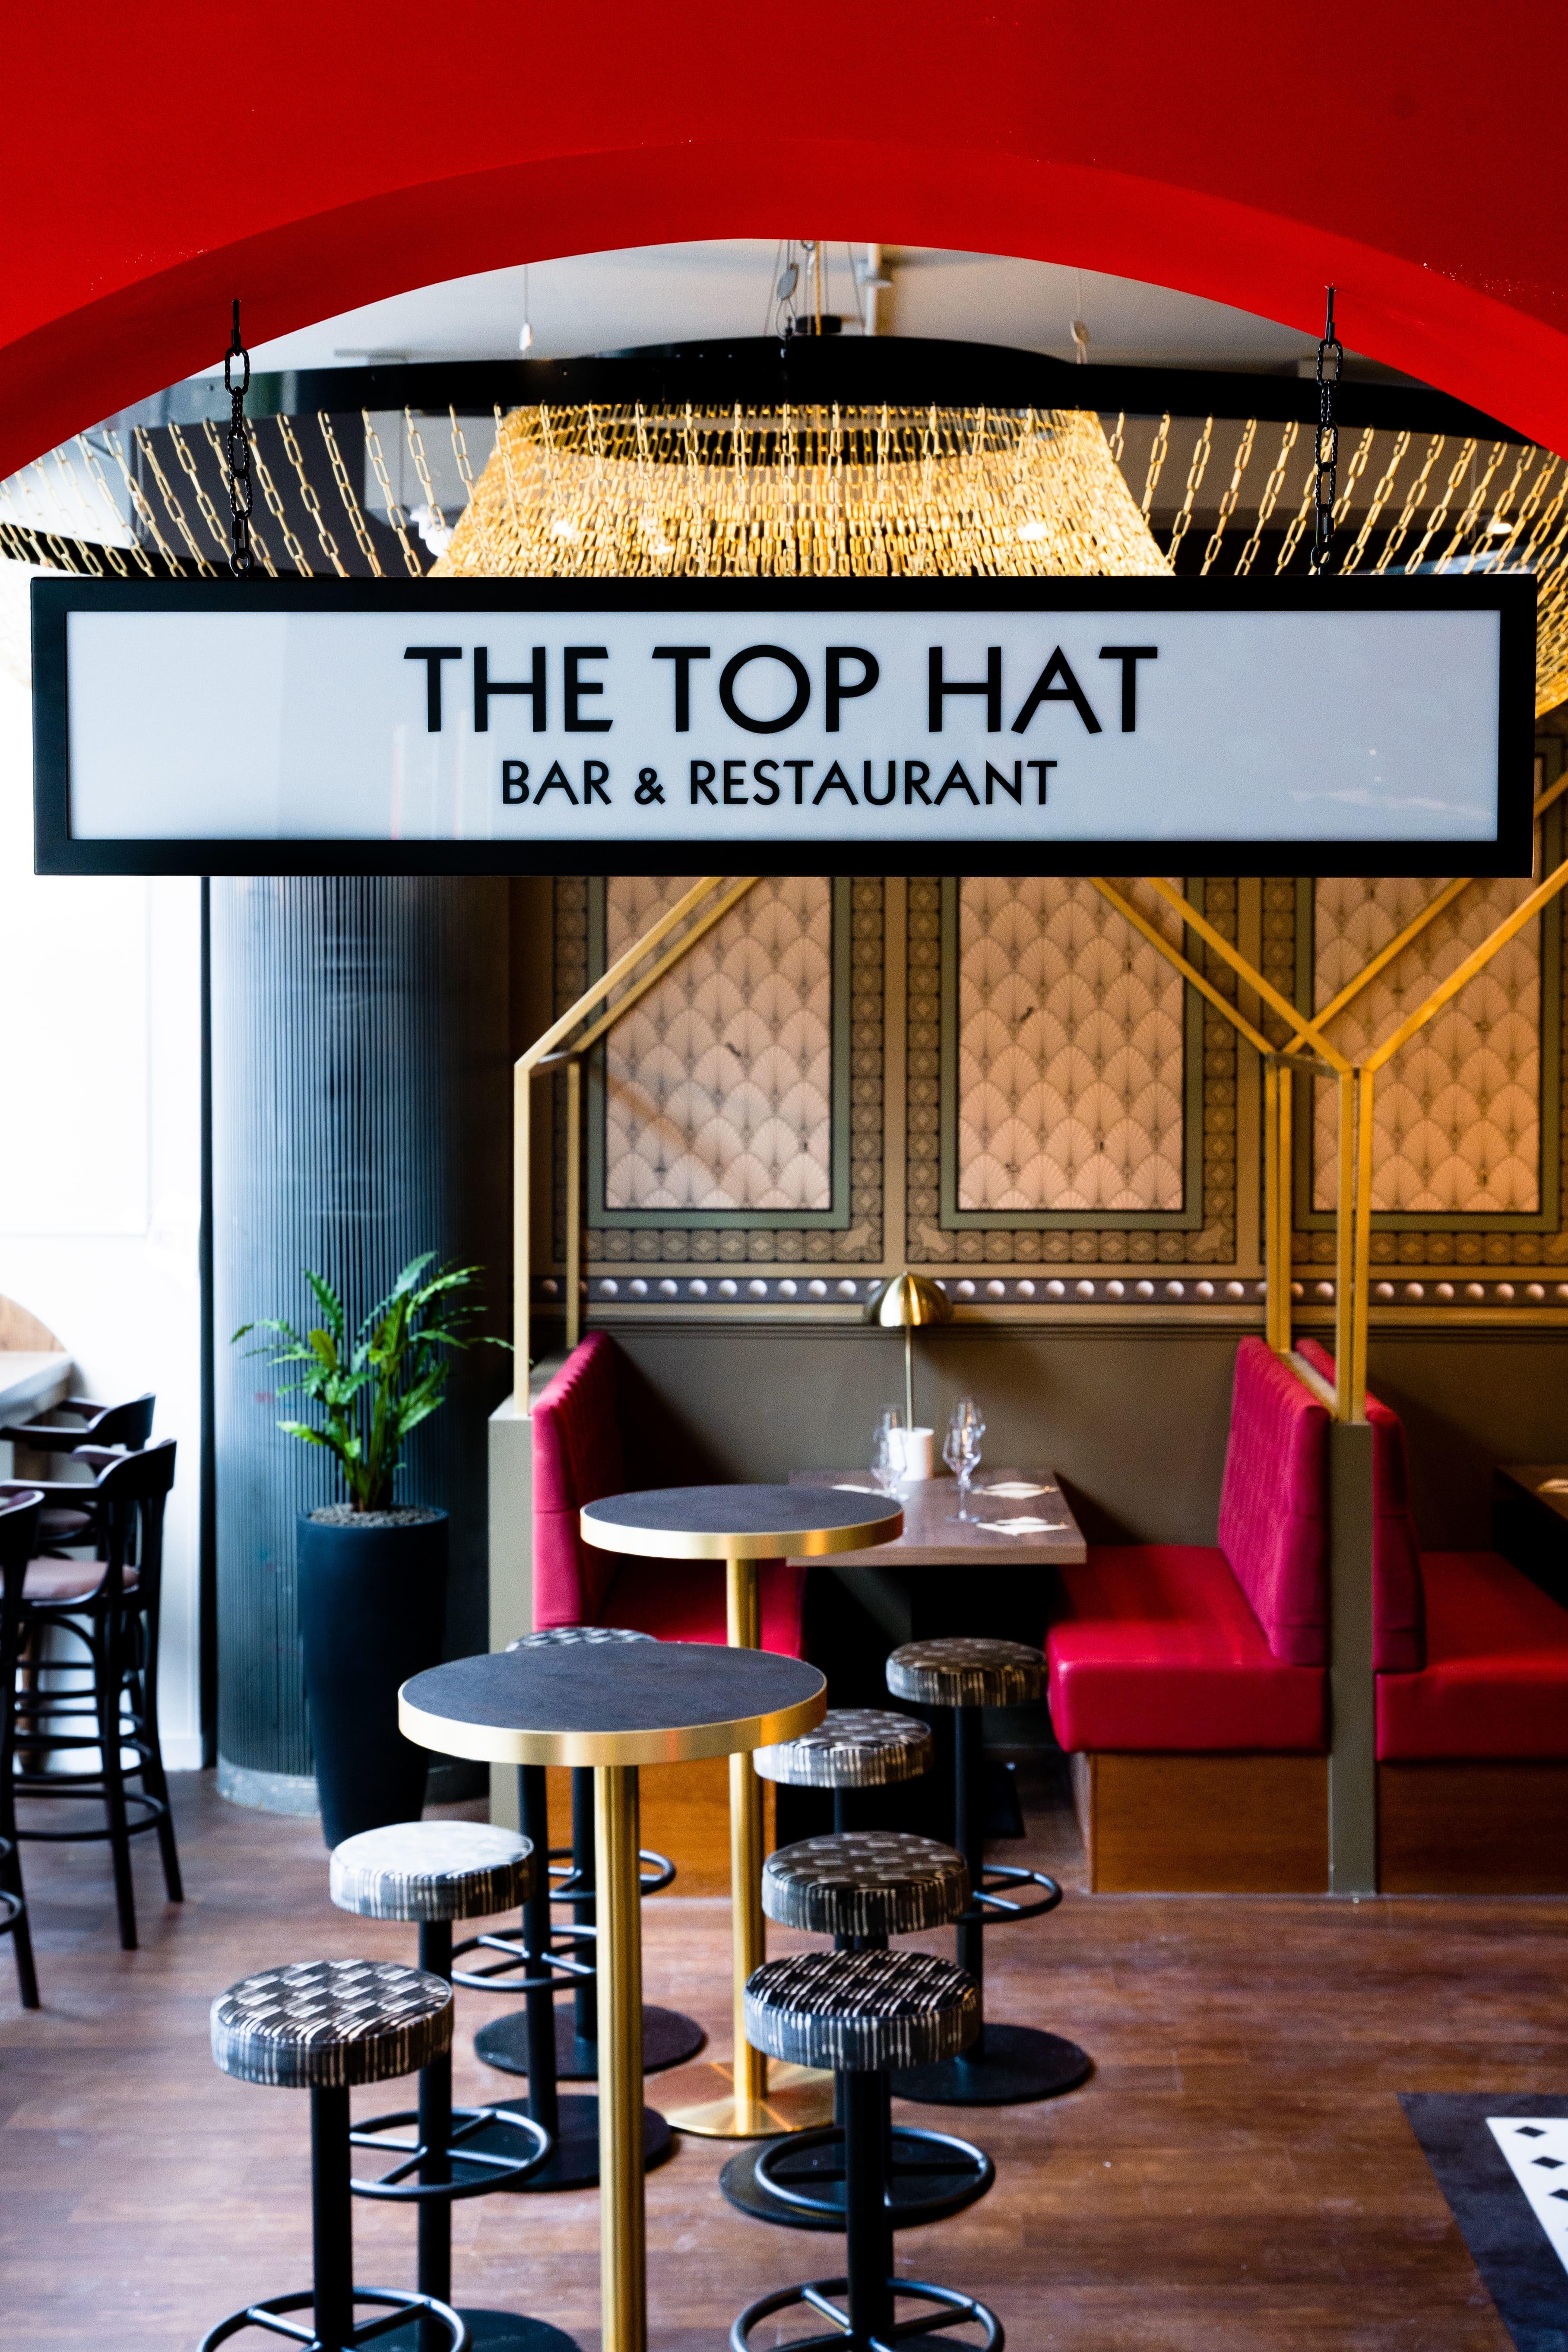 Top Hat Restaurant And Bar @ Monopoly Lifesized, Venue Hire And Experience, undefined photo #5